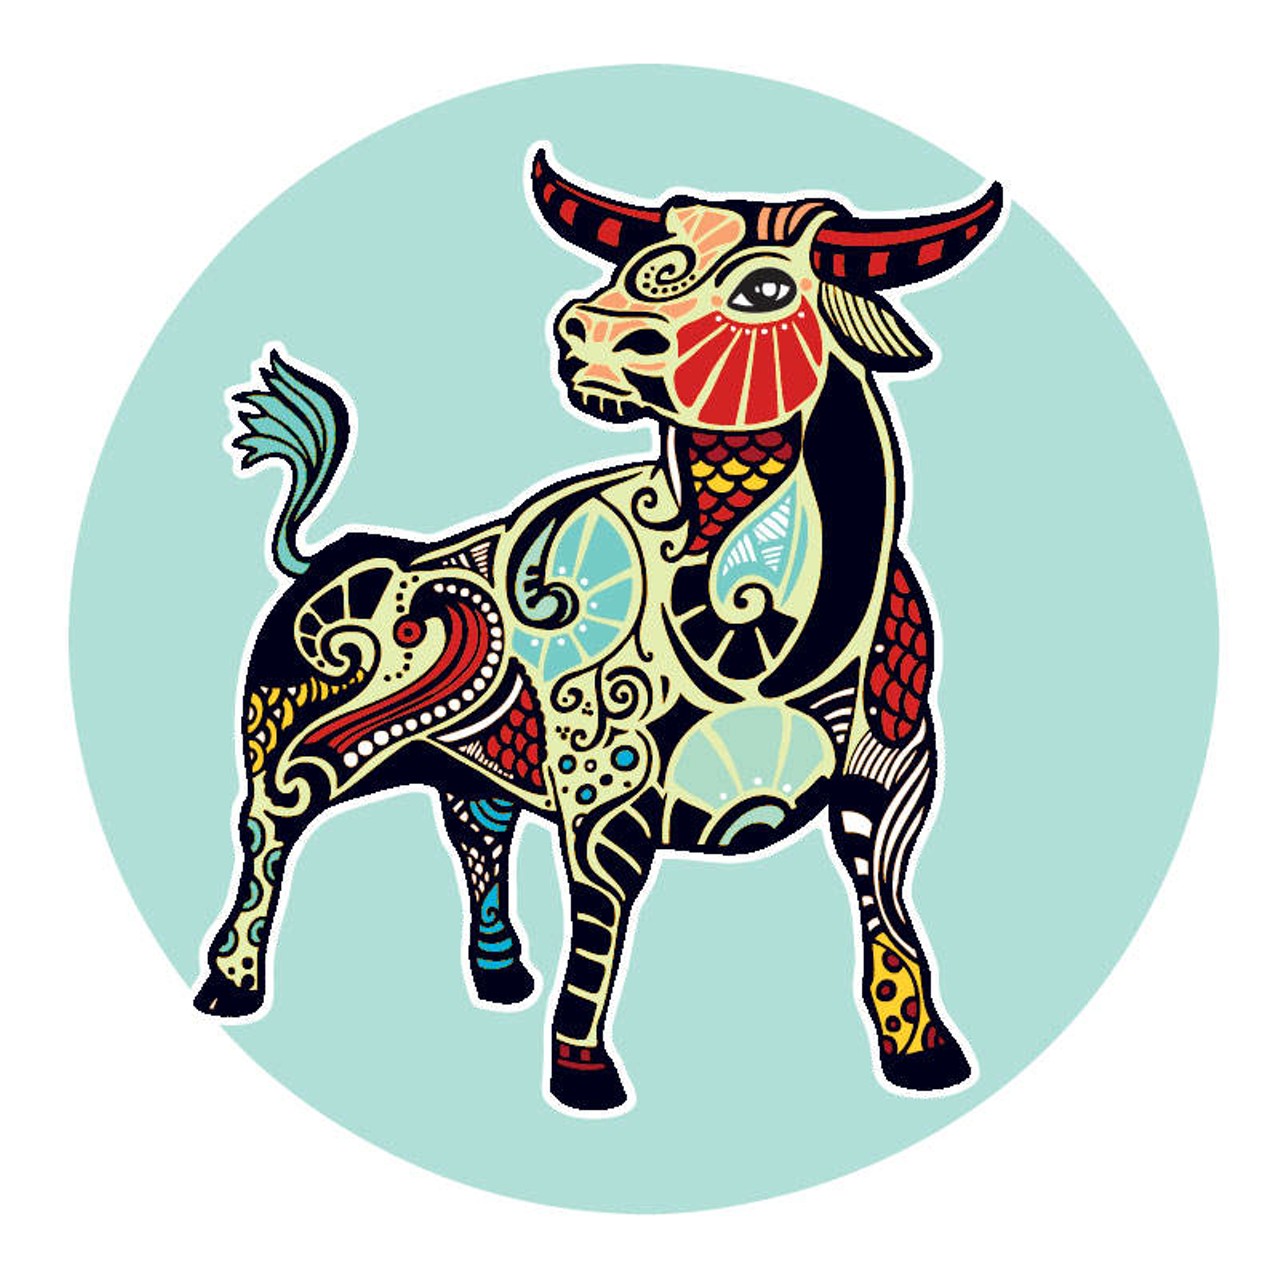 TAURUS (April 21 -May 20): 
Walking the fine line between faith and uncertainty has you wondering if you can trust people as far as you can throw them. It&#146;s nearly impossible to know for sure what&#146;s really going on. You don&#146;t have enough information to make any clear judgment and there&#146;s so much old business screwing up your perspective, half the time you don&#146;t even know what you&#146;re looking at. Haul back and return to the place that feels grounded enough to handle anything. From that vantage point, you will be able to cut through the B.S. and figure out whether it&#146;s time to fish or cut bait.